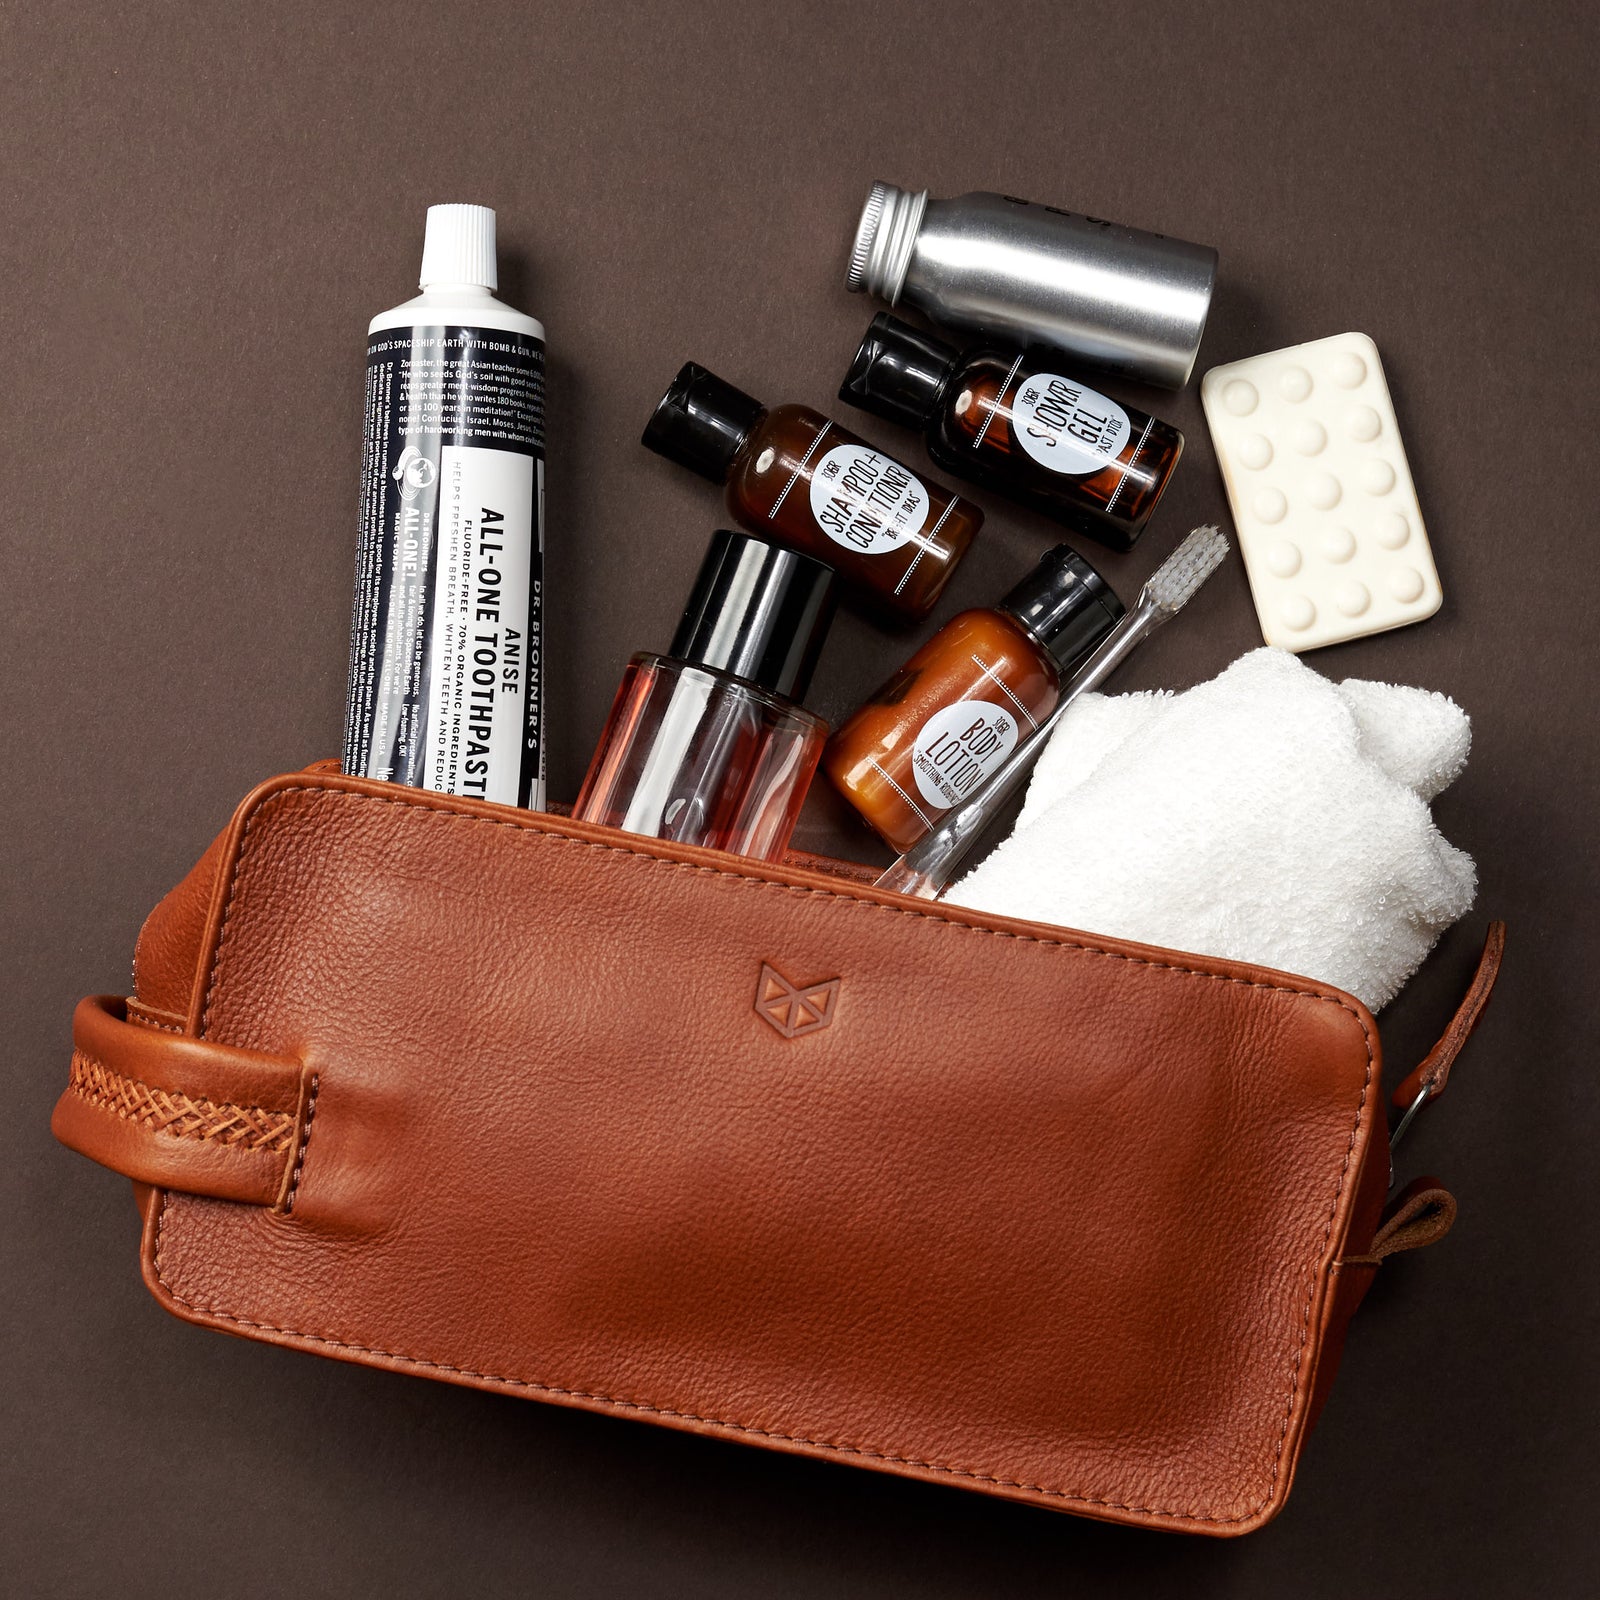 Styling products . Tan leather toiletry, shaving bag with hand stitched handle. Groomsmen gifts. Leather good crafted by Capra Leather 